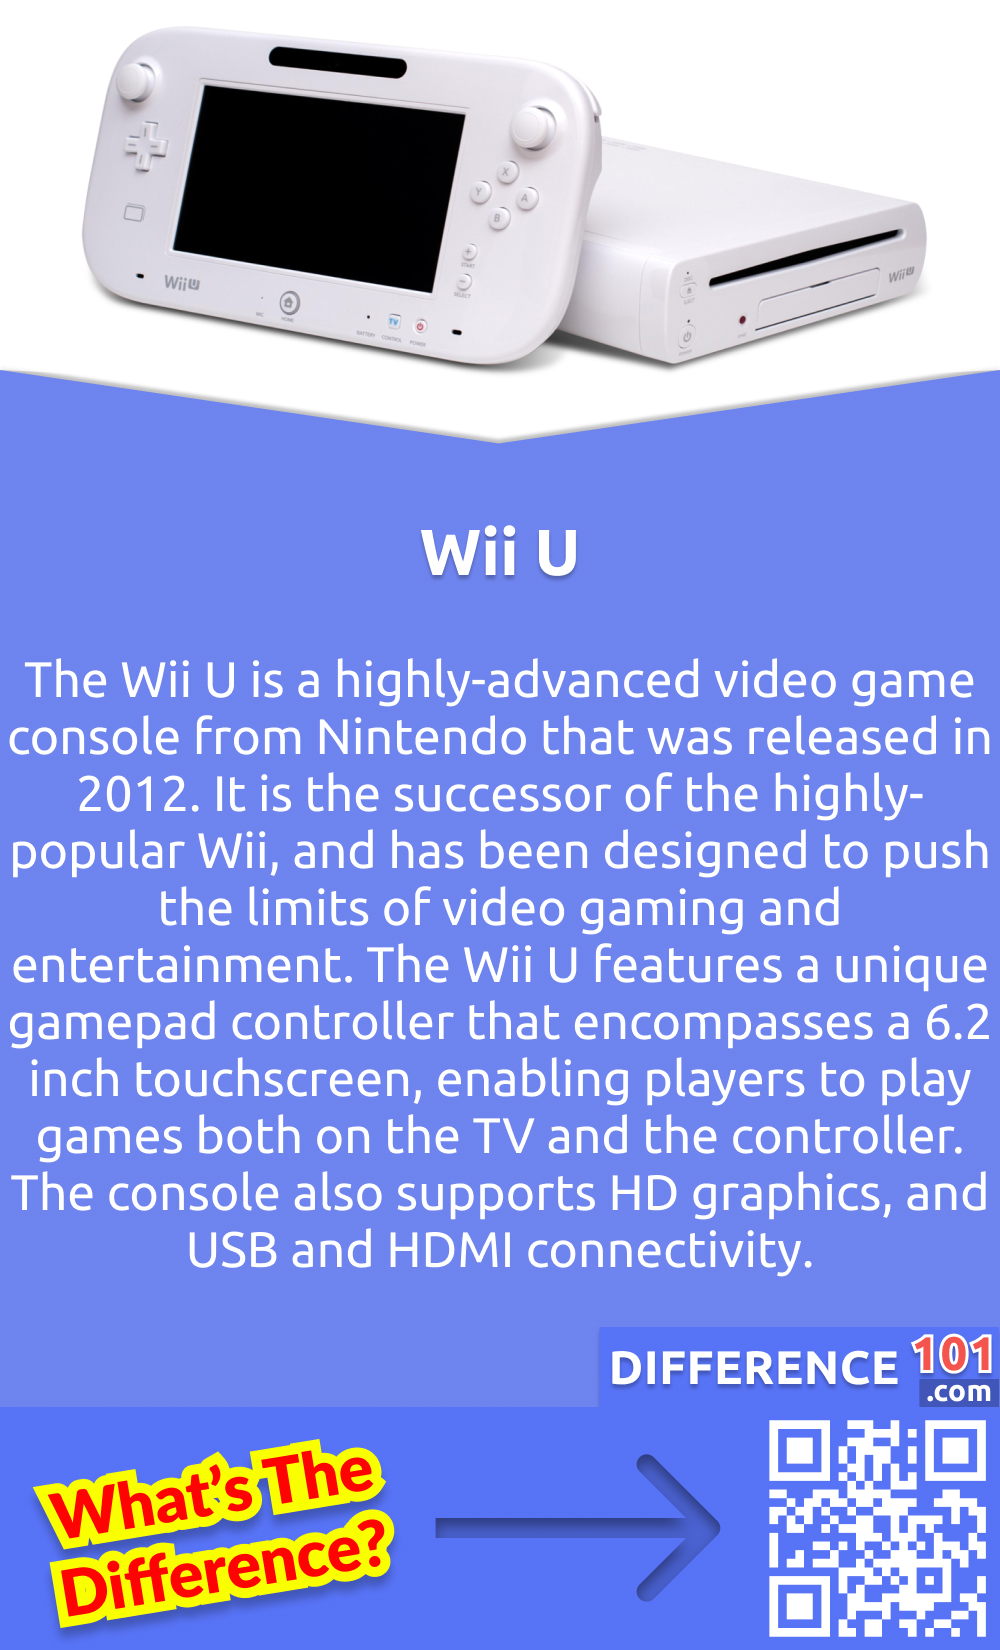 What Is Wii U? The Wii U is a highly-advanced video game console from Nintendo that was released in 2012. It is the successor of the highly-popular Wii, and has been designed to push the limits of video gaming and entertainment. The Wii U features a unique gamepad controller that encompasses a 6.2 inch touchscreen, enabling players to play games both on the TV and the controller. The console also supports HD graphics, and USB and HDMI connectivity. It allows multiple players to join in on games simultaneously, thereby enhancing the multiplayer gaming experience. With its innovative features and highly advanced technology, the Wii U is a significant upgrade from the Wii and has become a highly sought-after gaming console among gamers.